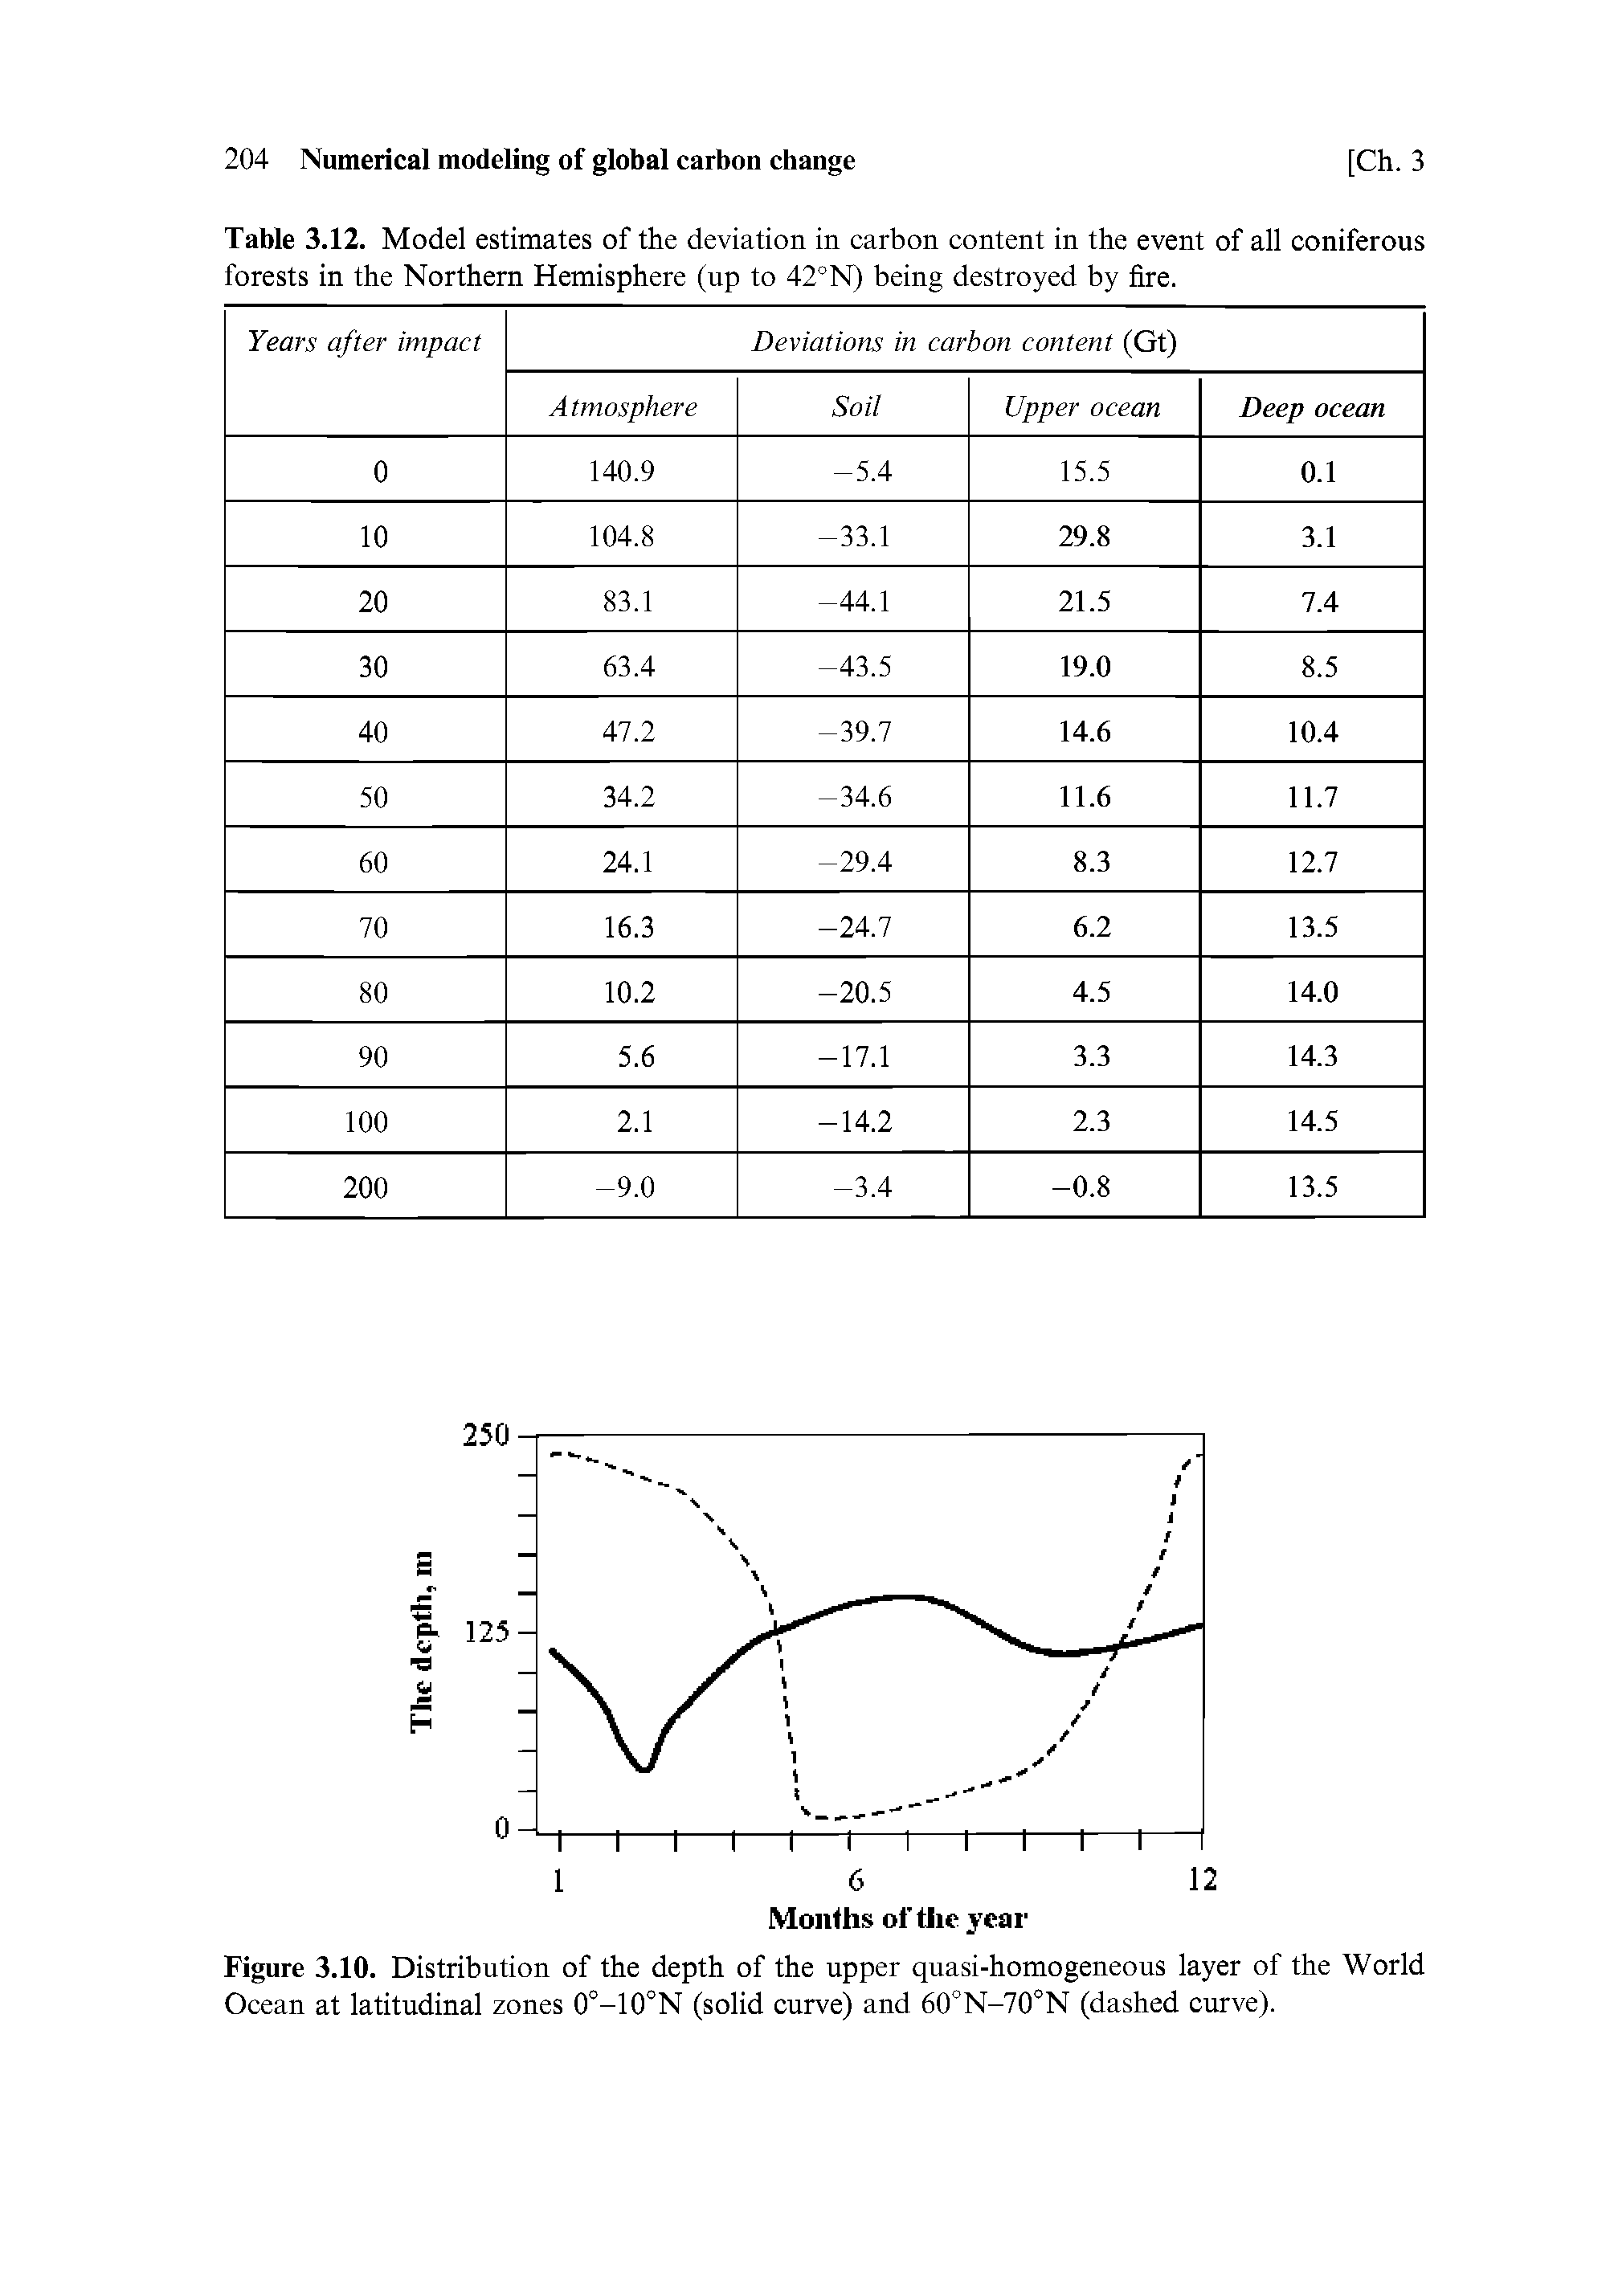 Figure 3.10. Distribution of the depth of the upper quasi-homogeneous layer of the World Ocean at latitudinal zones 0°-10°N (solid curve) and 60°N-70°N (dashed curve).